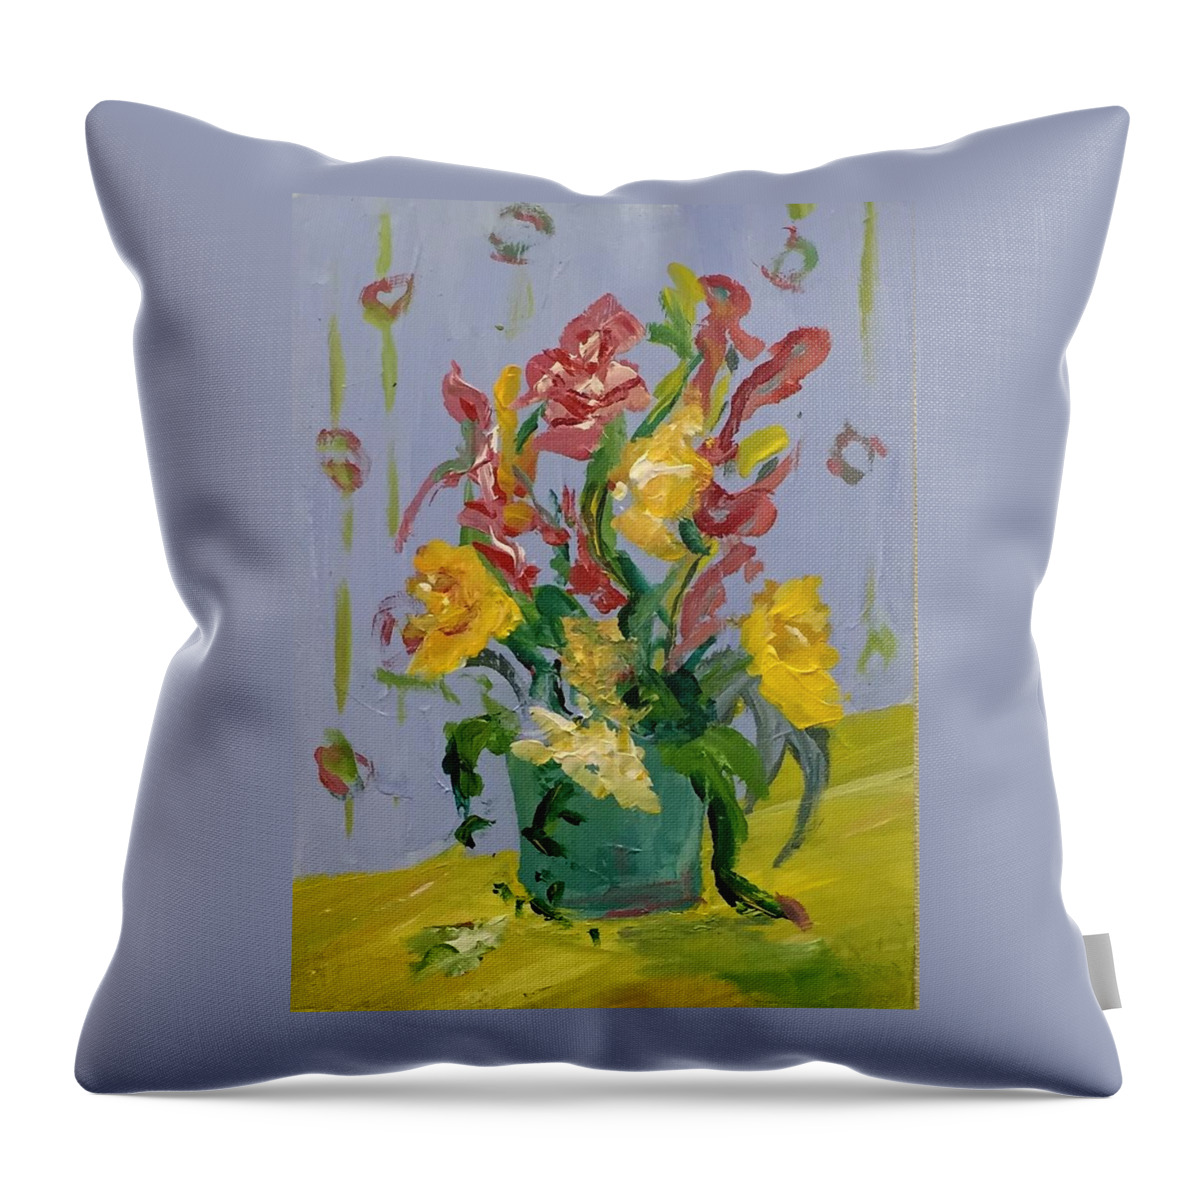 Still Life Throw Pillow featuring the painting Tulips by Alida M Haslett